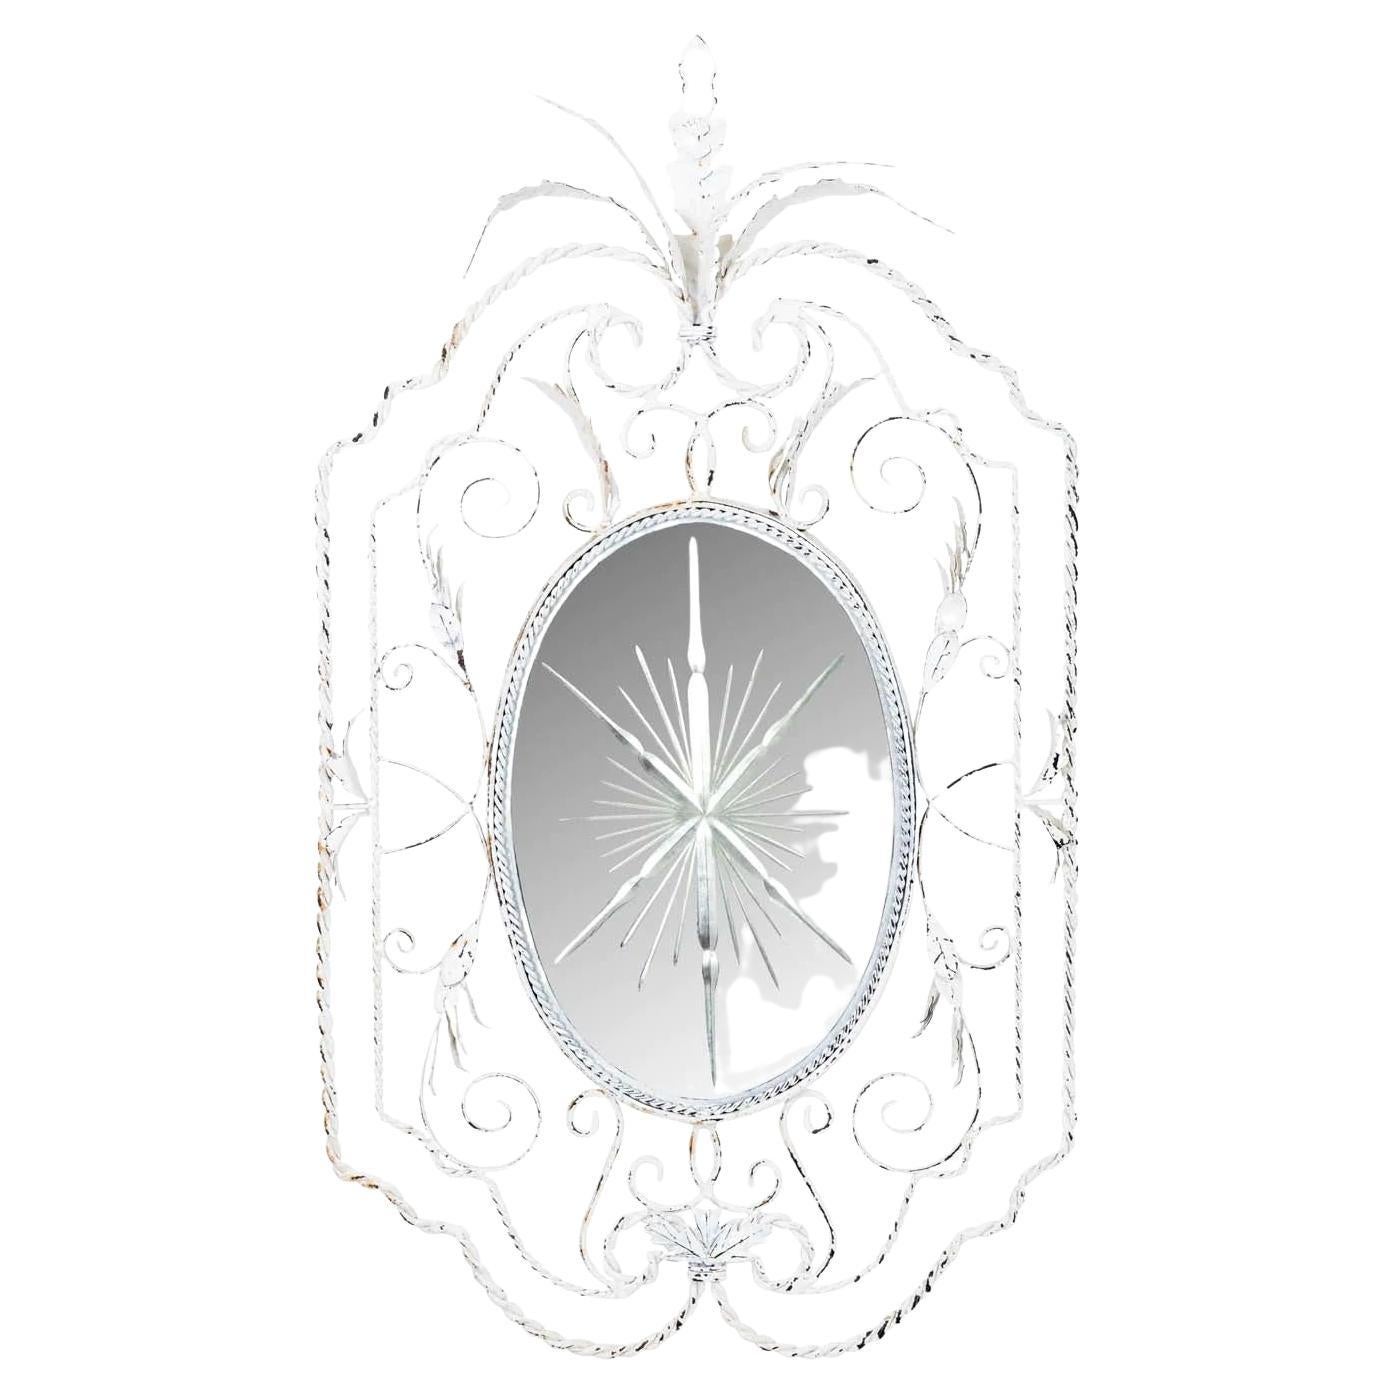 Painted twisted iron framed mirror with distressed starburst in mirror. Original shabby chic distressed white painted finish. Overall good condition.